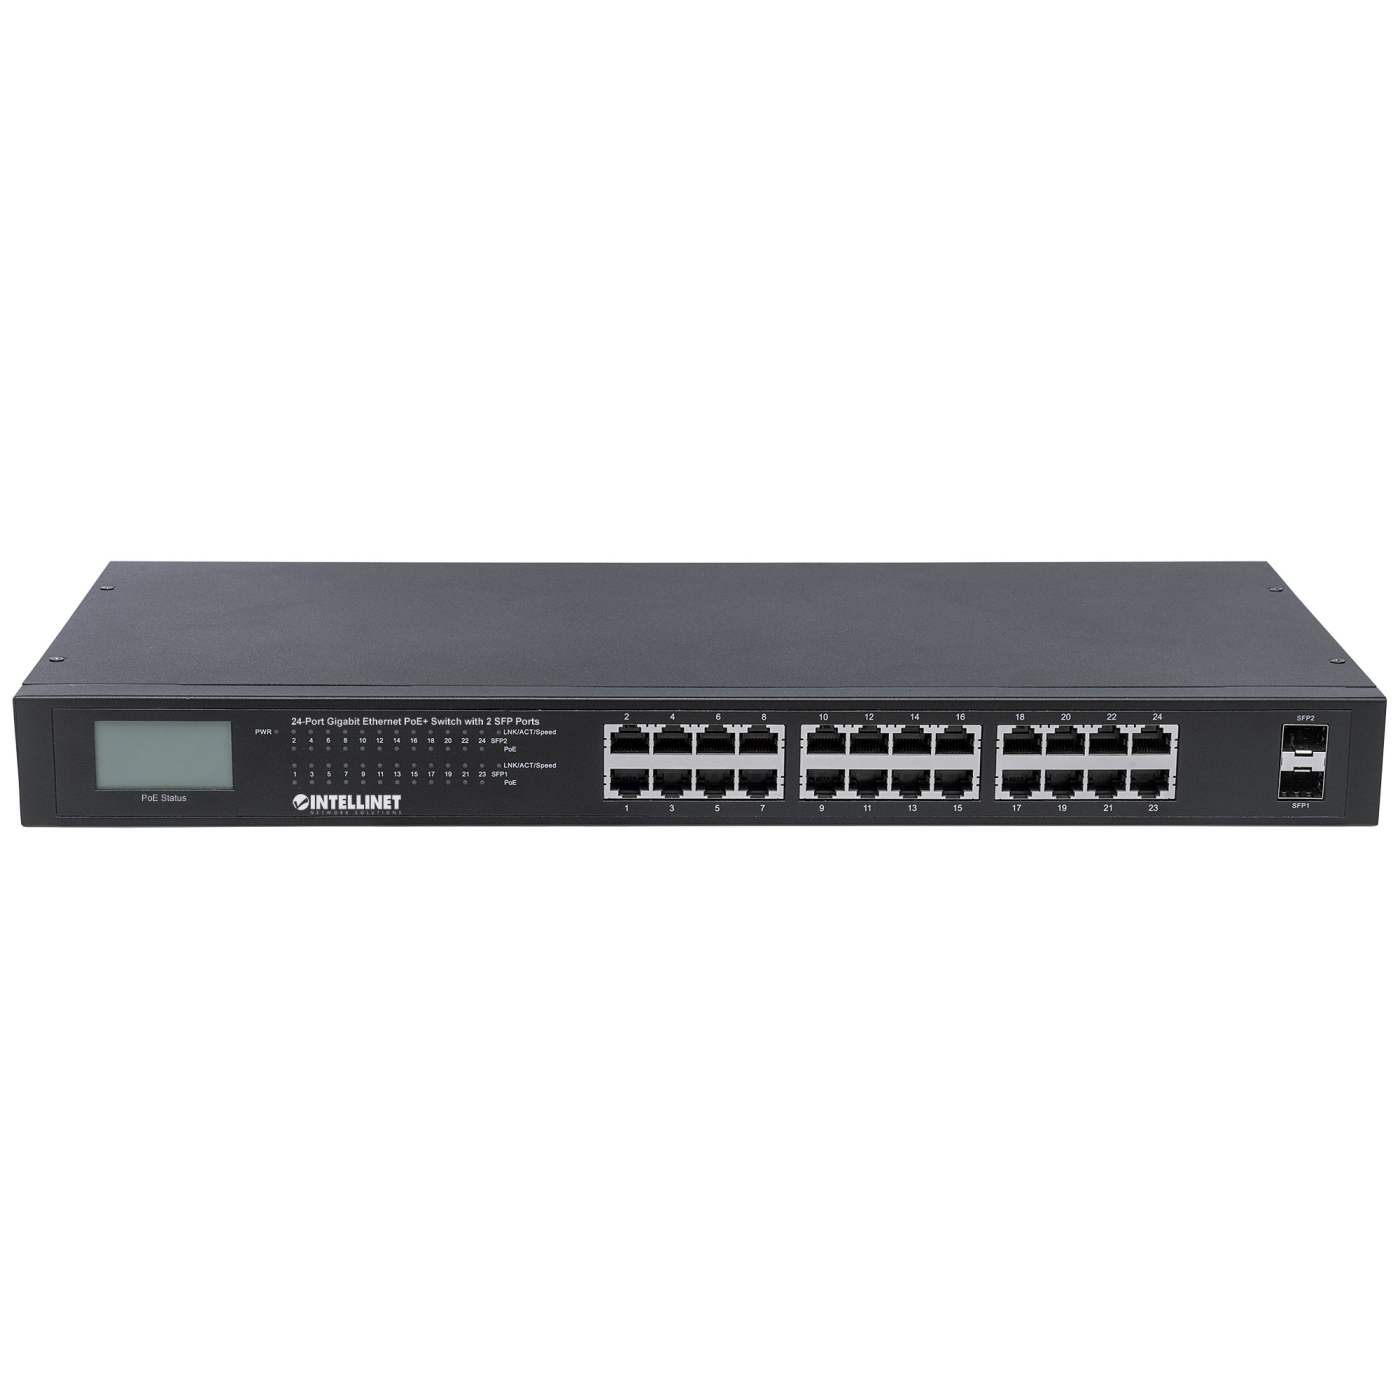 24-Port Gigabit Ethernet PoE+ Switch with 2 SFP Ports and LCD Screen Image 4